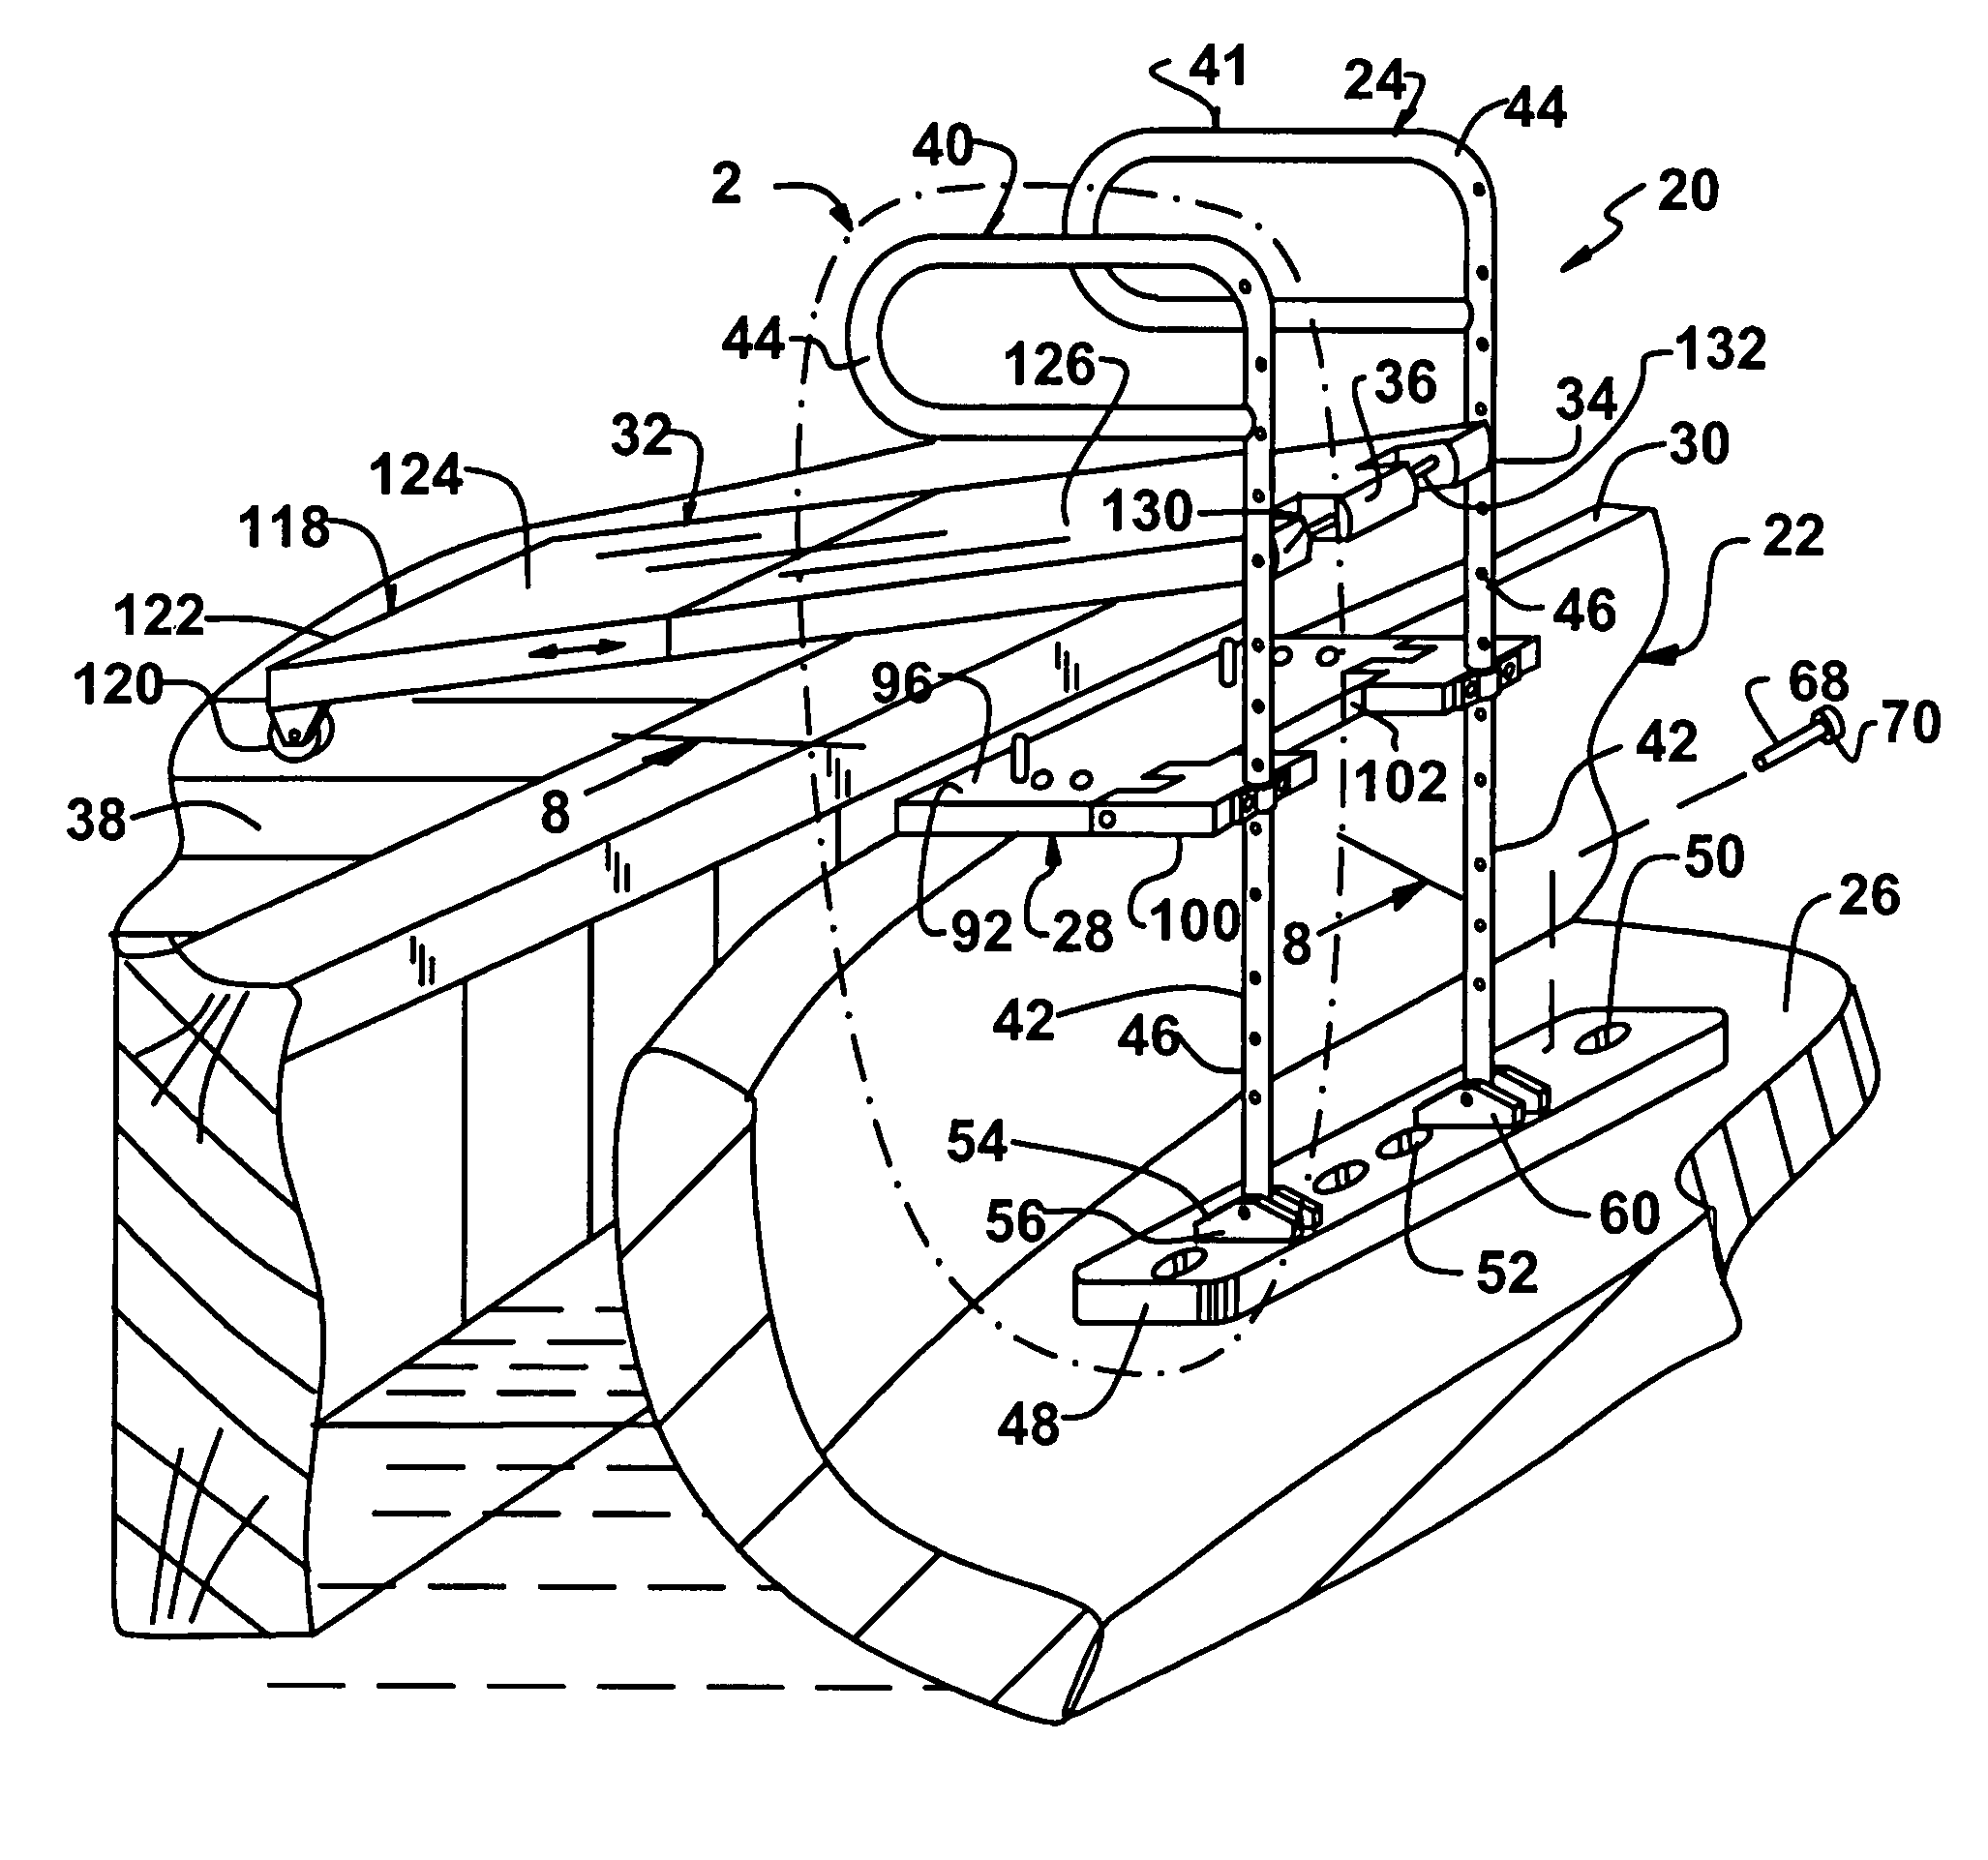 Gangplank system for facilitating safe boarding and disembarking from a boat